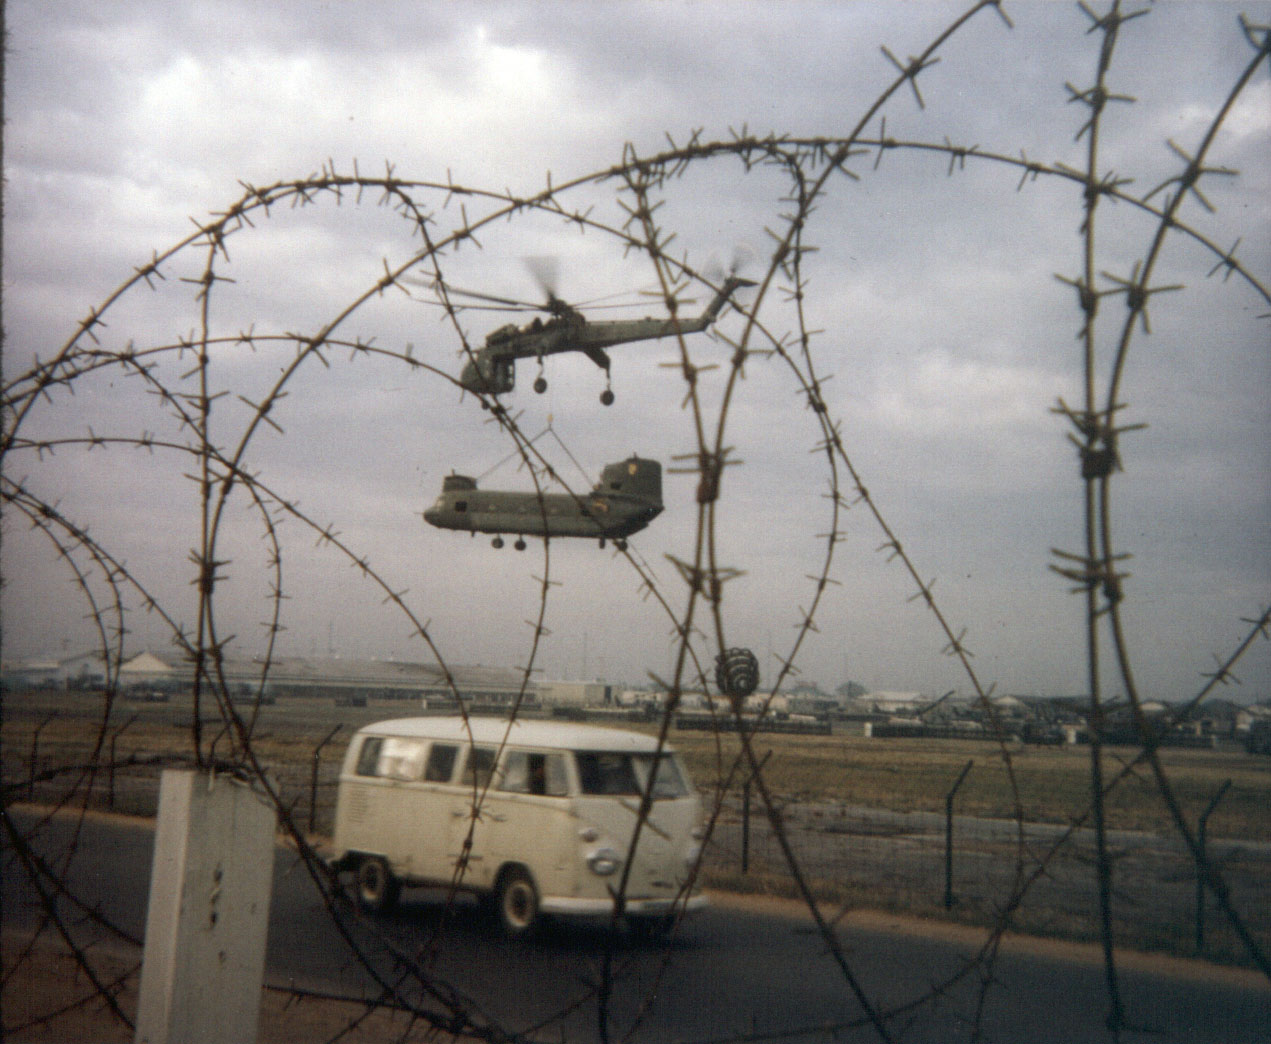 Damaged helicopter being lifted to US Army facility at Ton Son Nhut Airbase 